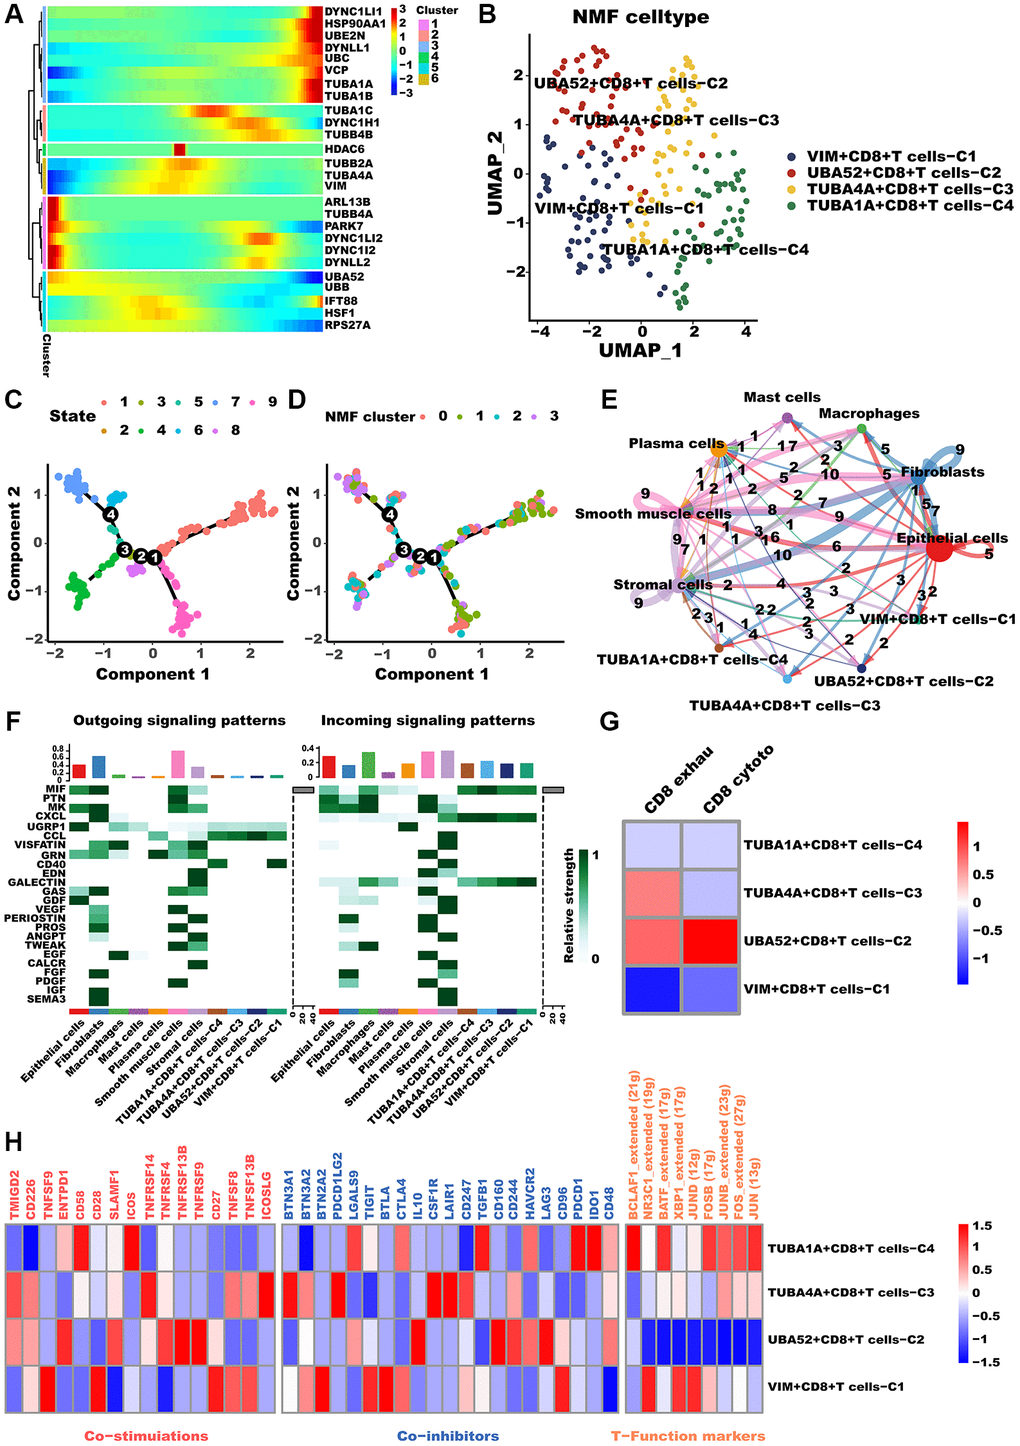 CD8+T cells differed in metabolism and polarization during aggrephagy. (A) Pseudotime trajectory analysis of aggrephagy genes in CD8+T cells. (B) NMF clustering and annotation in CD8+T cells classified by aggrephagy gene expression features. (C, D) The developing status of NMF-based CD8+T cells subtypes. (E) The number and weight of cell-cell interactions between aggrephagy-related CD8+T cells subtypes and other cell types. (F) A heat map summarizing the outgoing (secreting) and incoming (target) signal pathways of NMF-based aggrephagy-related CD8+T cells subtypes and other cell types. (G) Heatmap showing the comparison of CD8+T cell function signatures (exhaustion score and T cytotoxic score) between aggrephagy-related CD8+T cells subtypes. (H) Heatmap showing significantly different features among aggrephagy-related CD8+T cells subtypes, including Co-stimulations (left), Co-inhibitors (middle), and TFs (right).